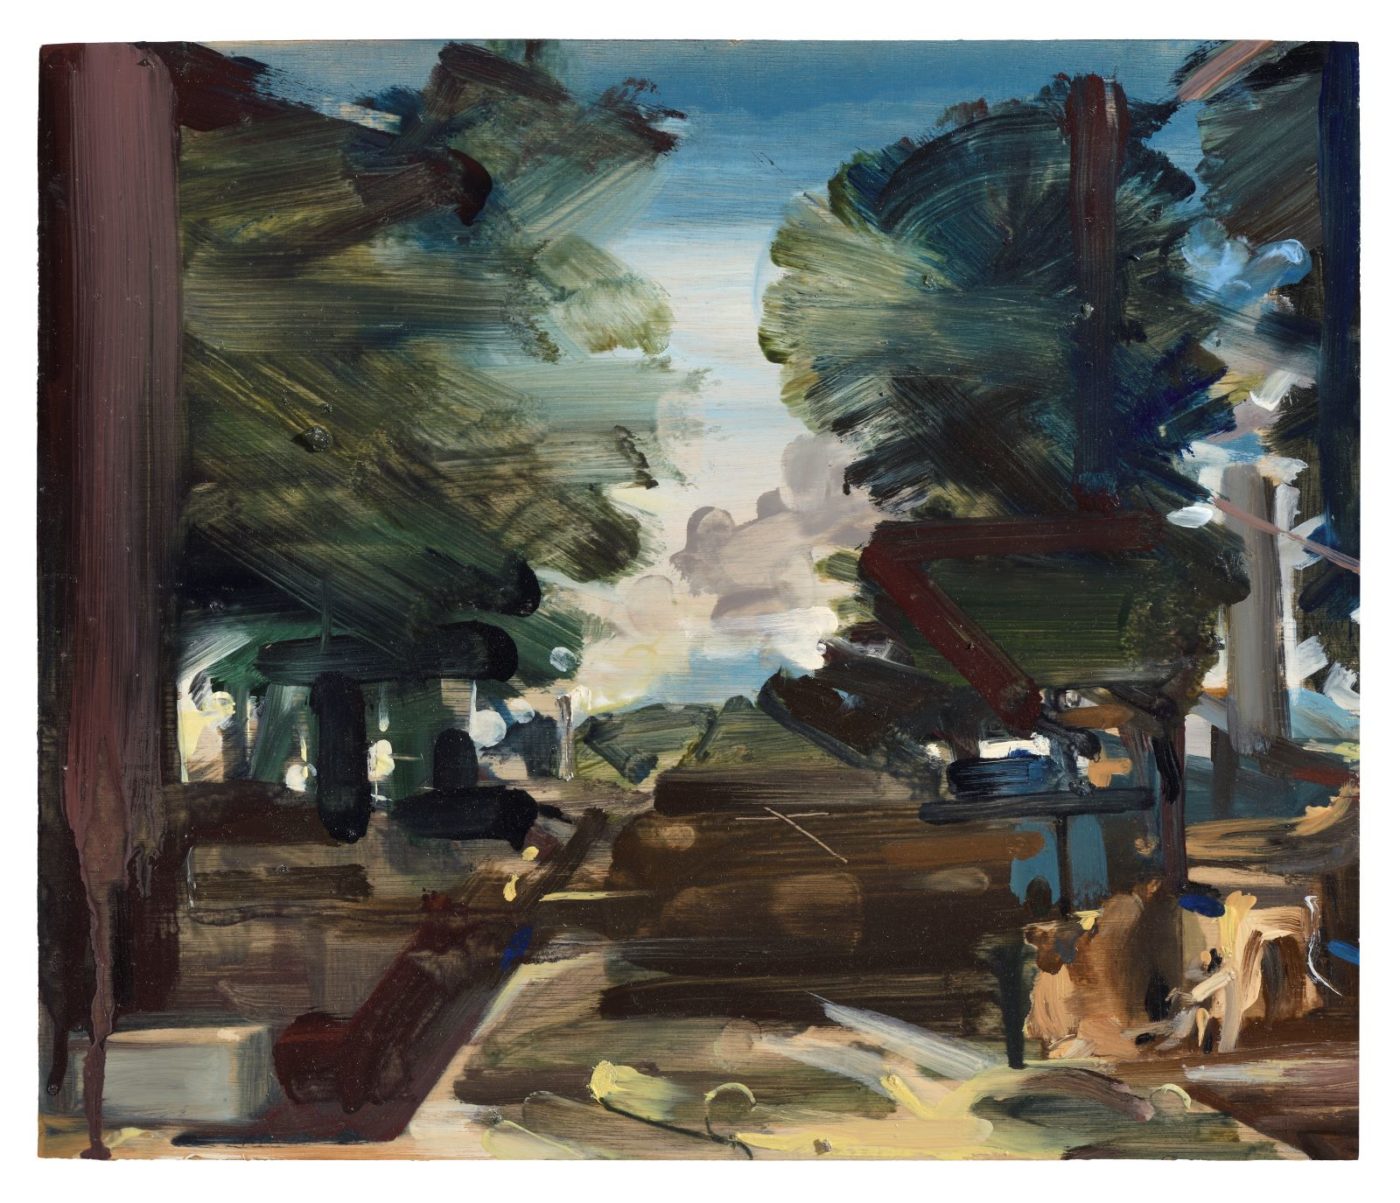 Kate Giles (b. 1962), Study after Poussin (A Roman Road) I